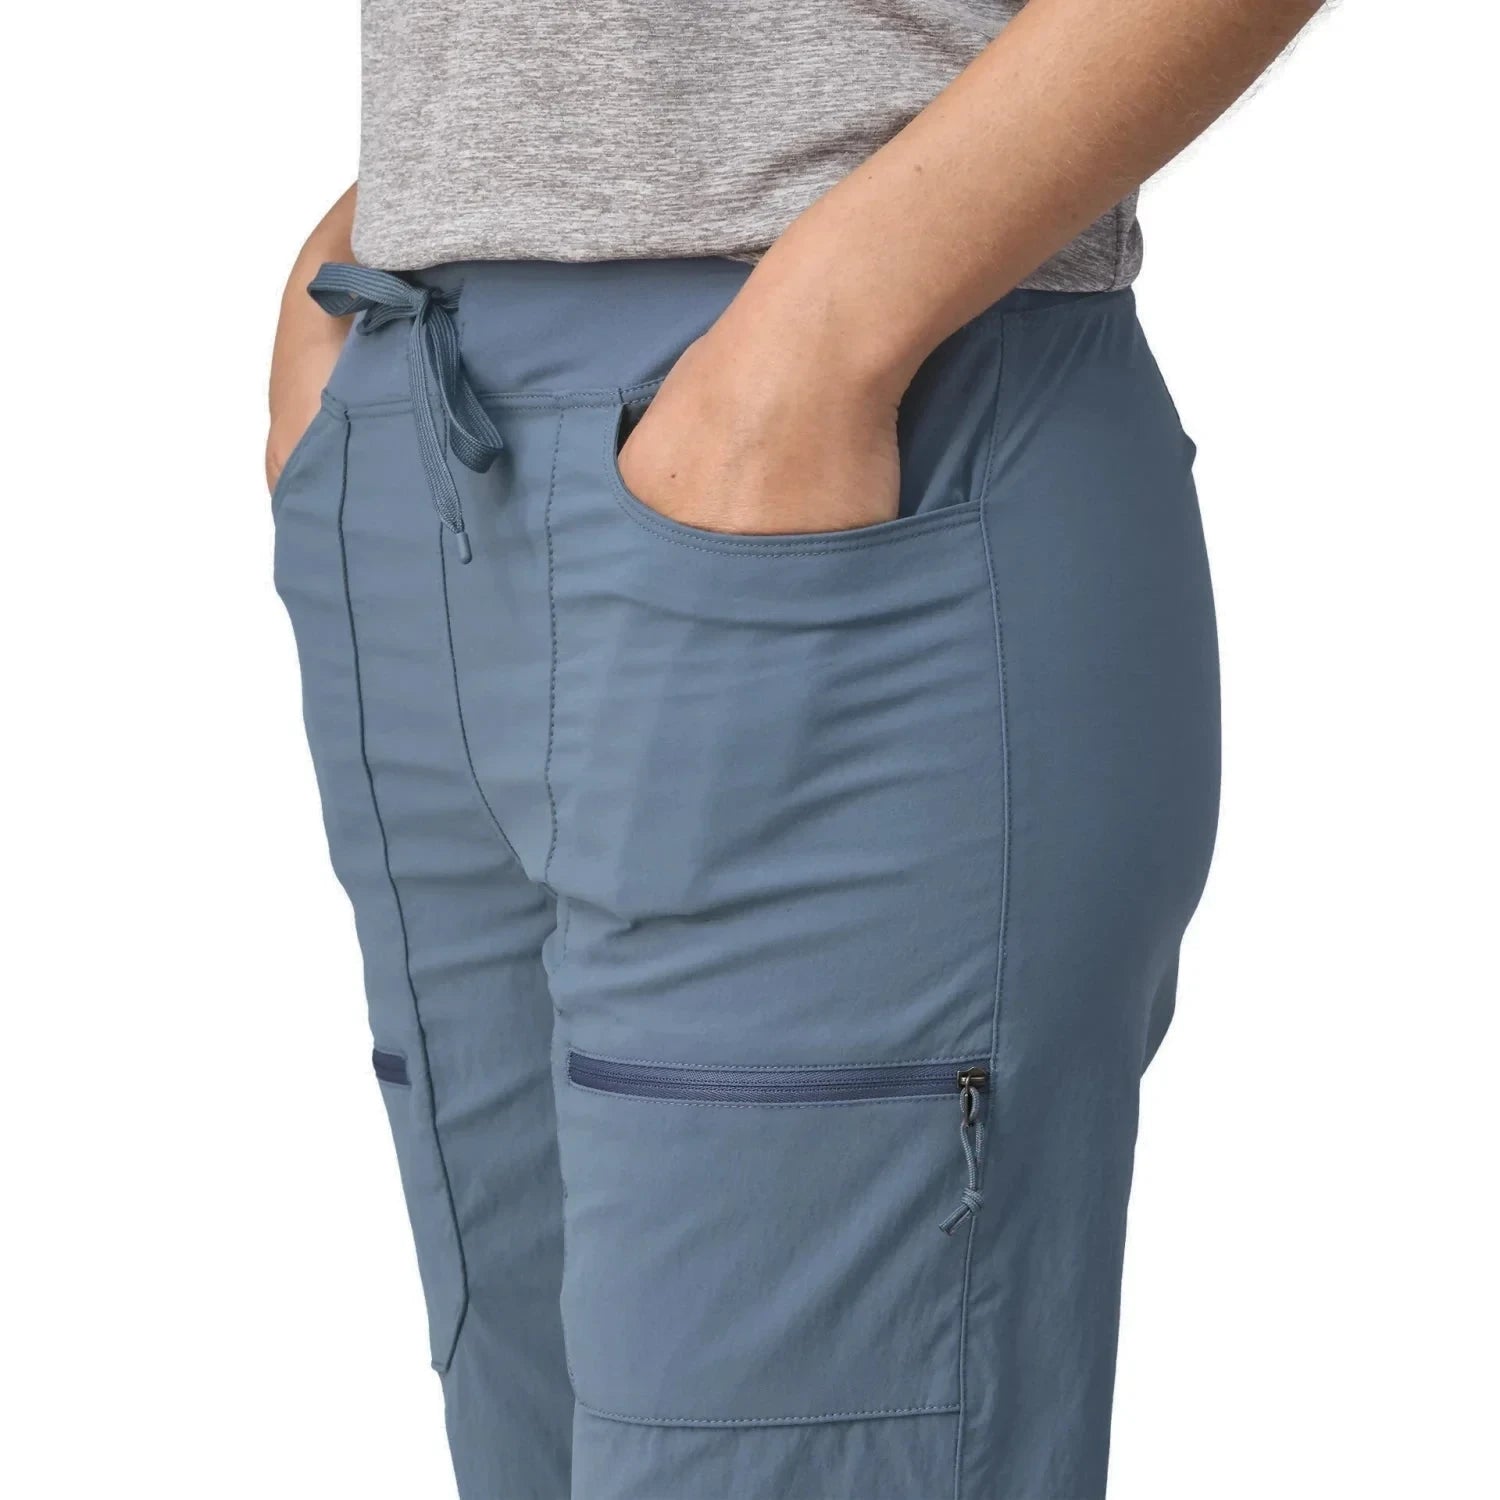 Patagonia W's Quandary Joggers, Utility Blue, front pocket view on model